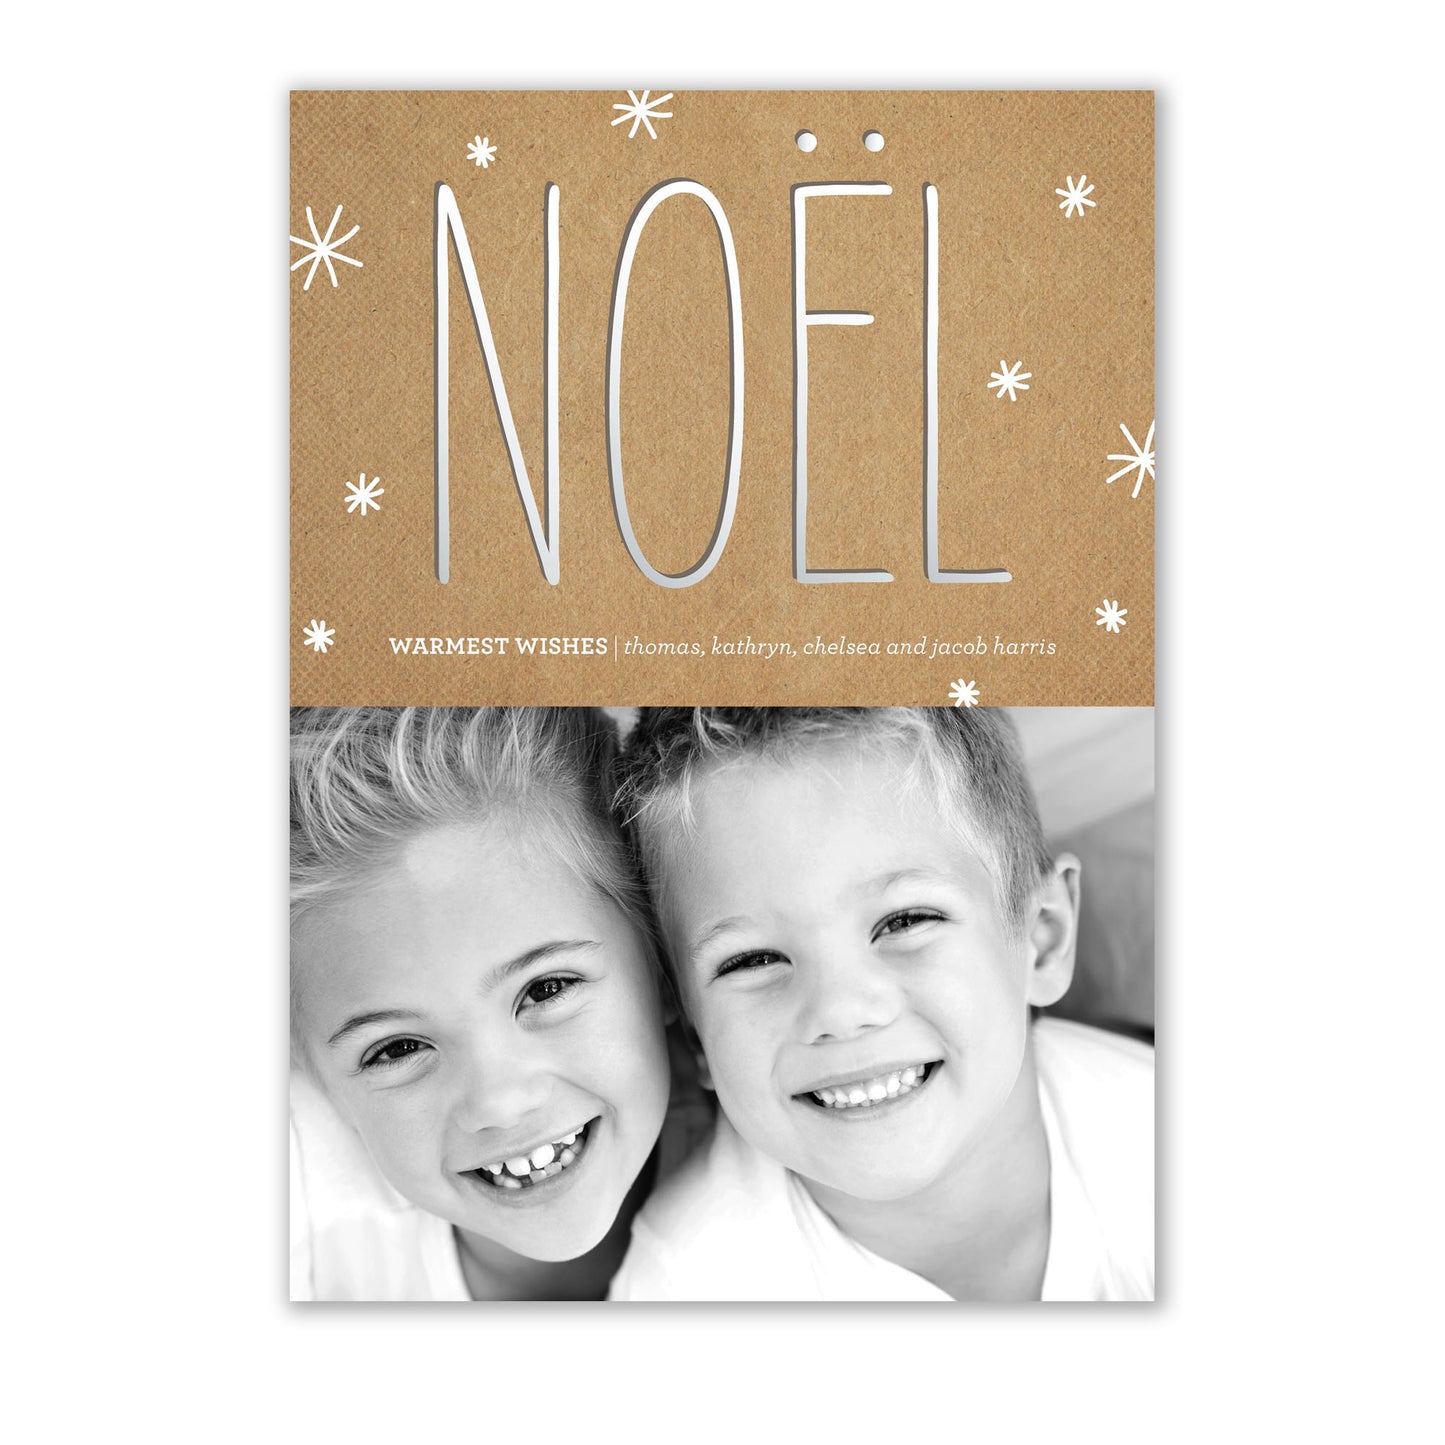 A close up of a white unlined envelope from the Noteworthy Krafty Noel Photo Card holiday photo card.